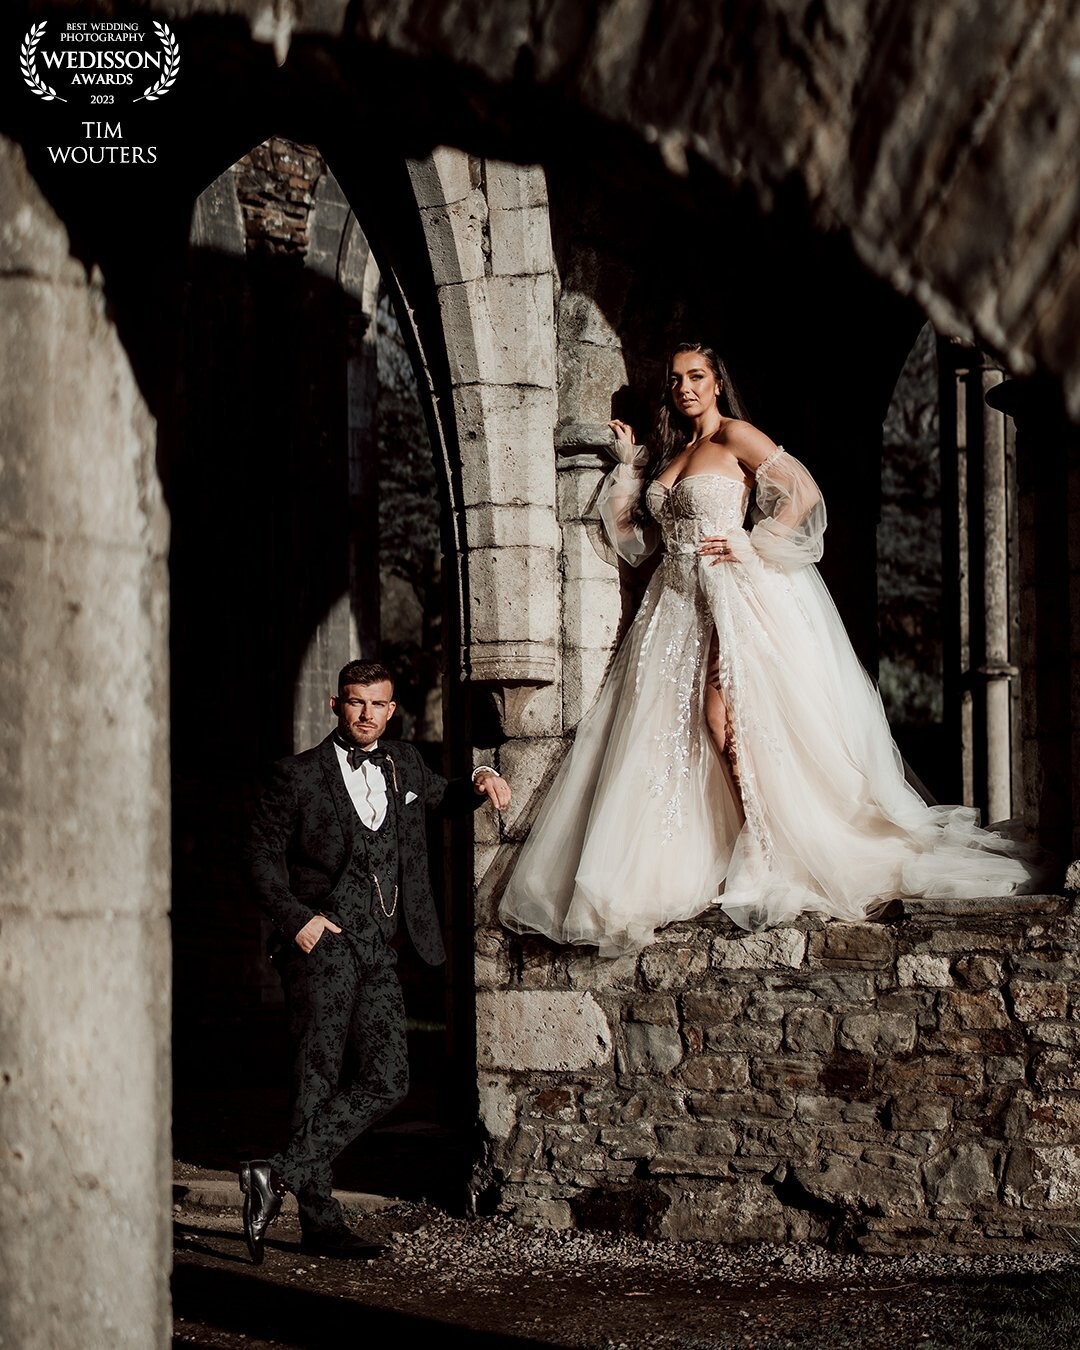 Shot at Margam castle in Wales. Using the light and shadows to create a amazing image. The ruins really added to the Vibe of the photo. Combine that with this power couple and You Cannot go wrong.